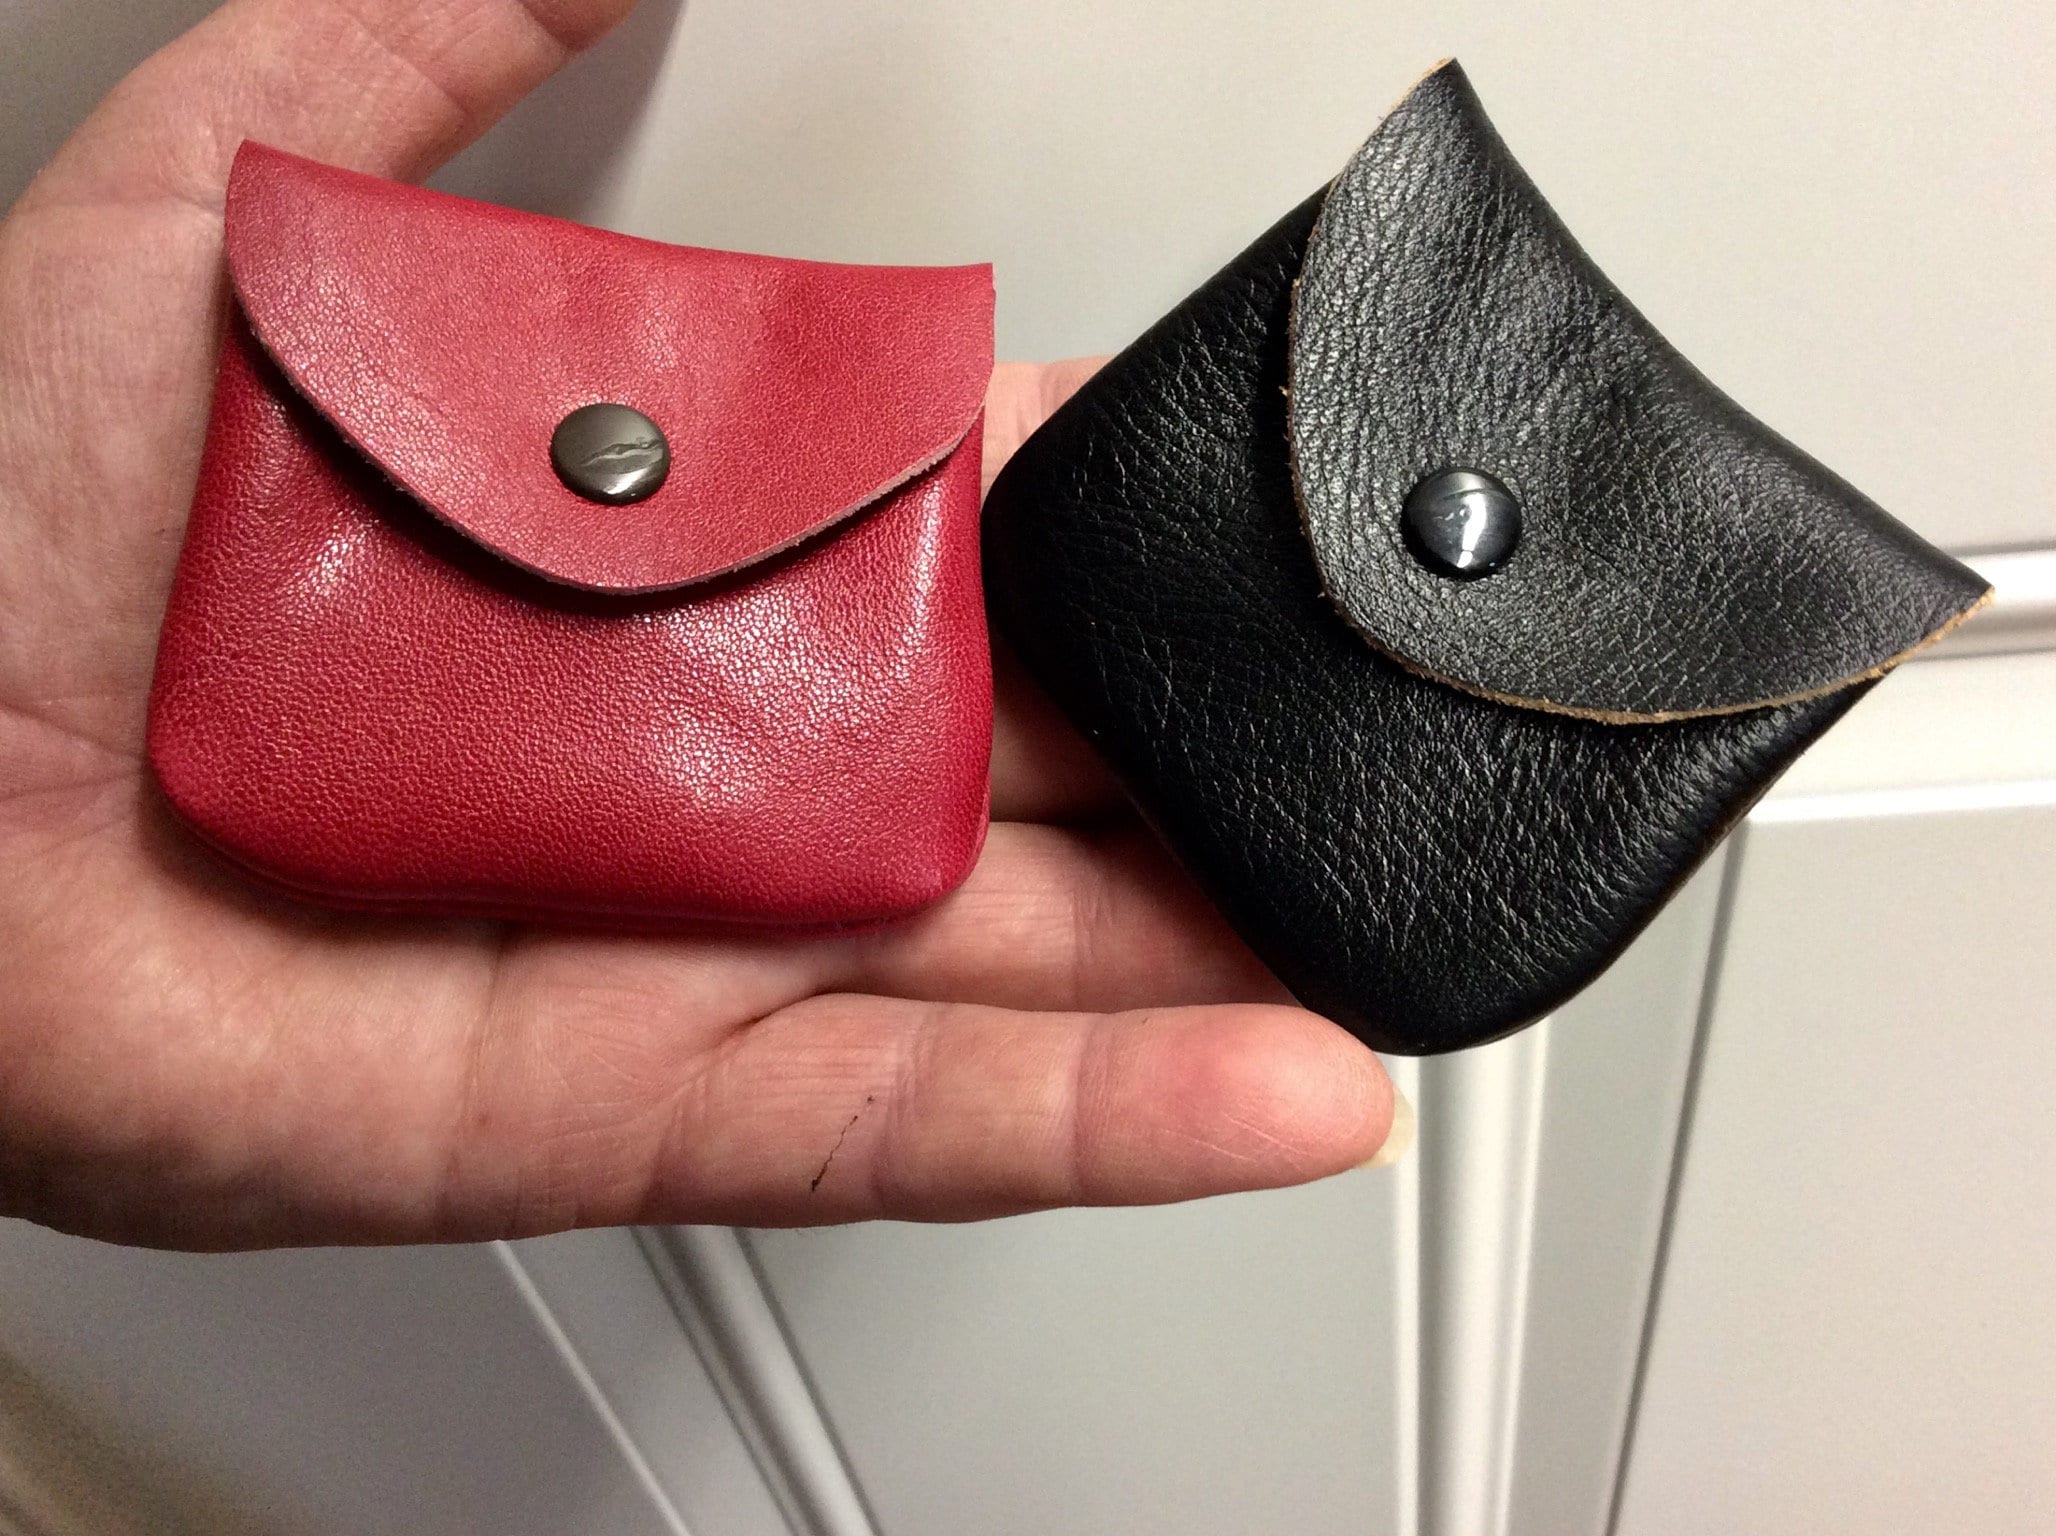 Steel Horse Leather The Cael | Handmade Leather Coin Purse with Zipper